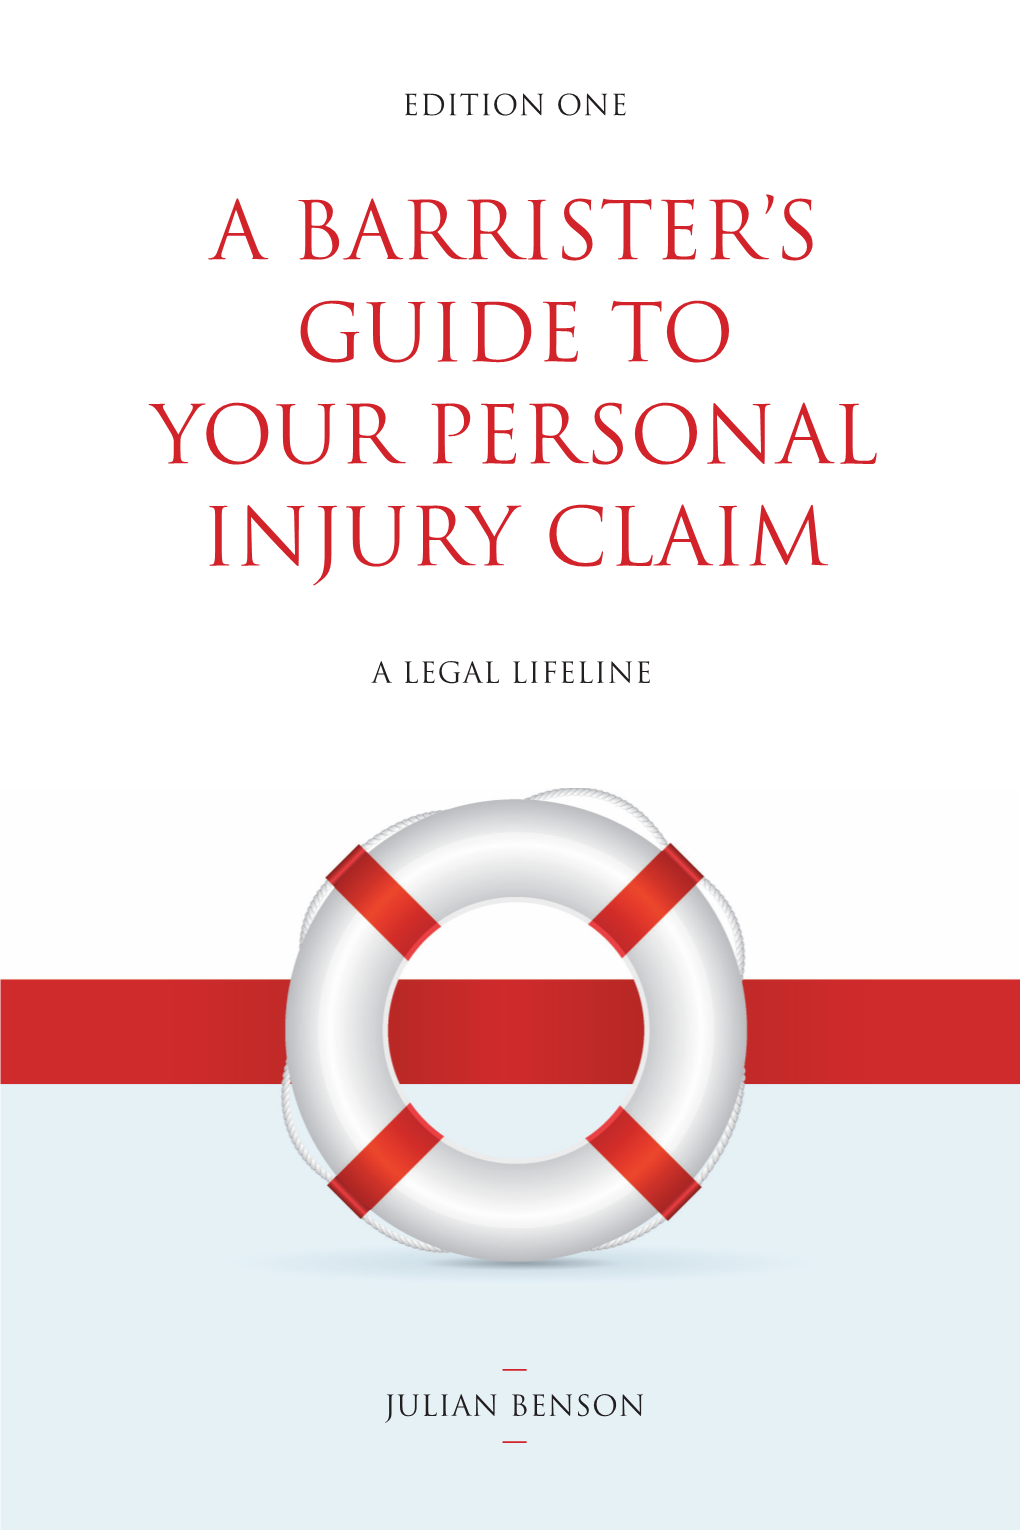 A Barrister's Guide to Your Personal Injury Claim